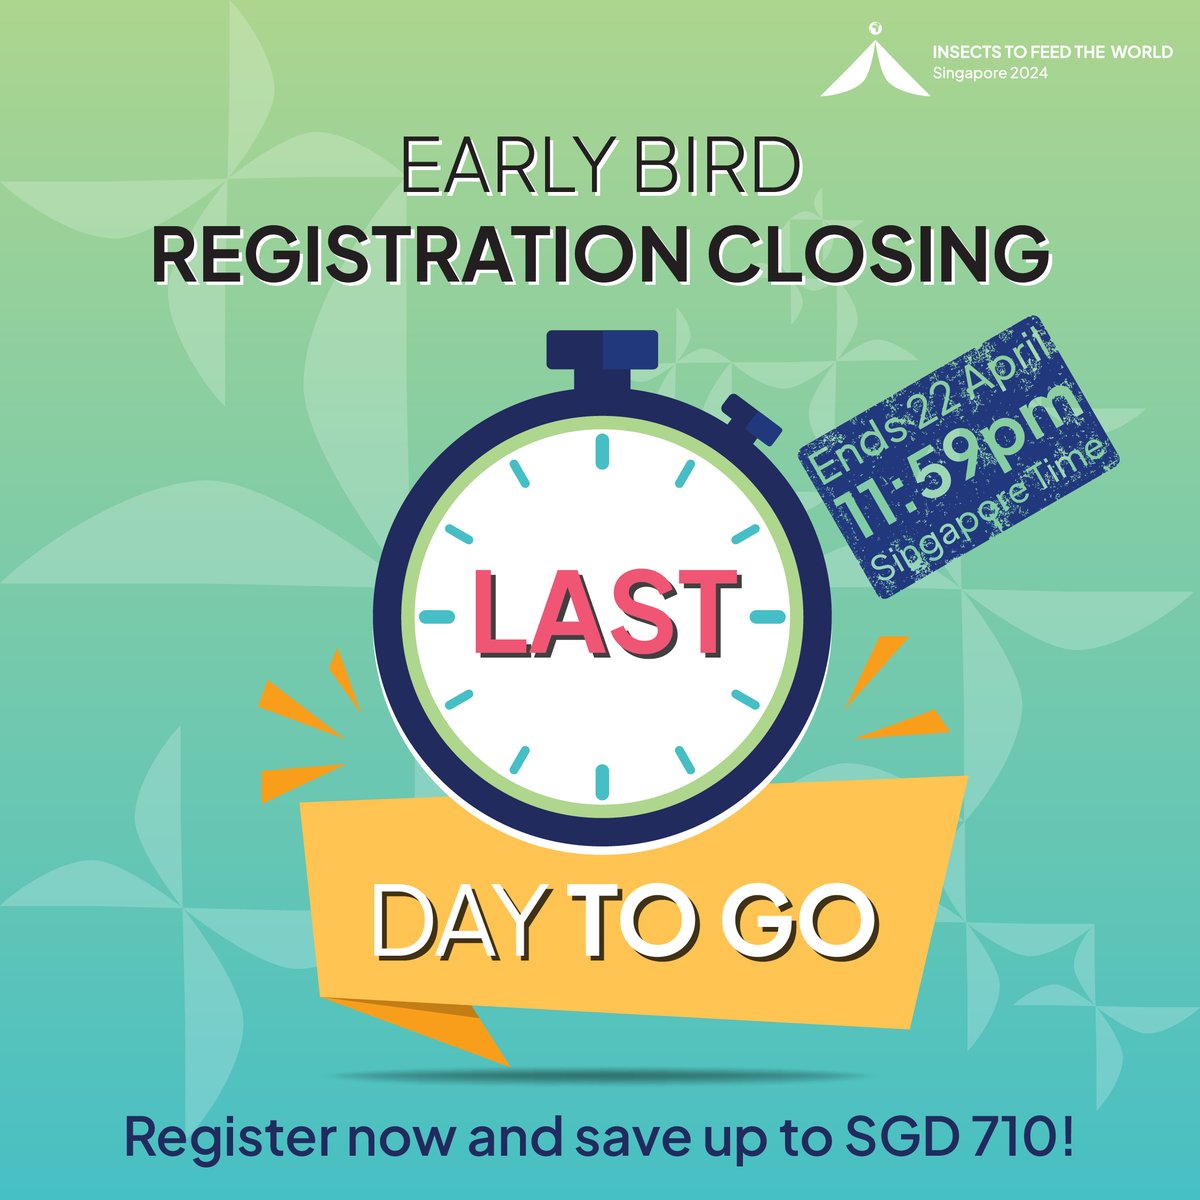 ⏰ Last call for early bird registration! Don't miss out on savings! Register now before it's too late! Ends at 11:59 PM Singapore time! ➡bit.ly/47C8TXa
#IFW2024 #Insects #Conference #BSF #mealworm #cricket #silkwork #alternativeProtein #sustainability #earlybirdspecial